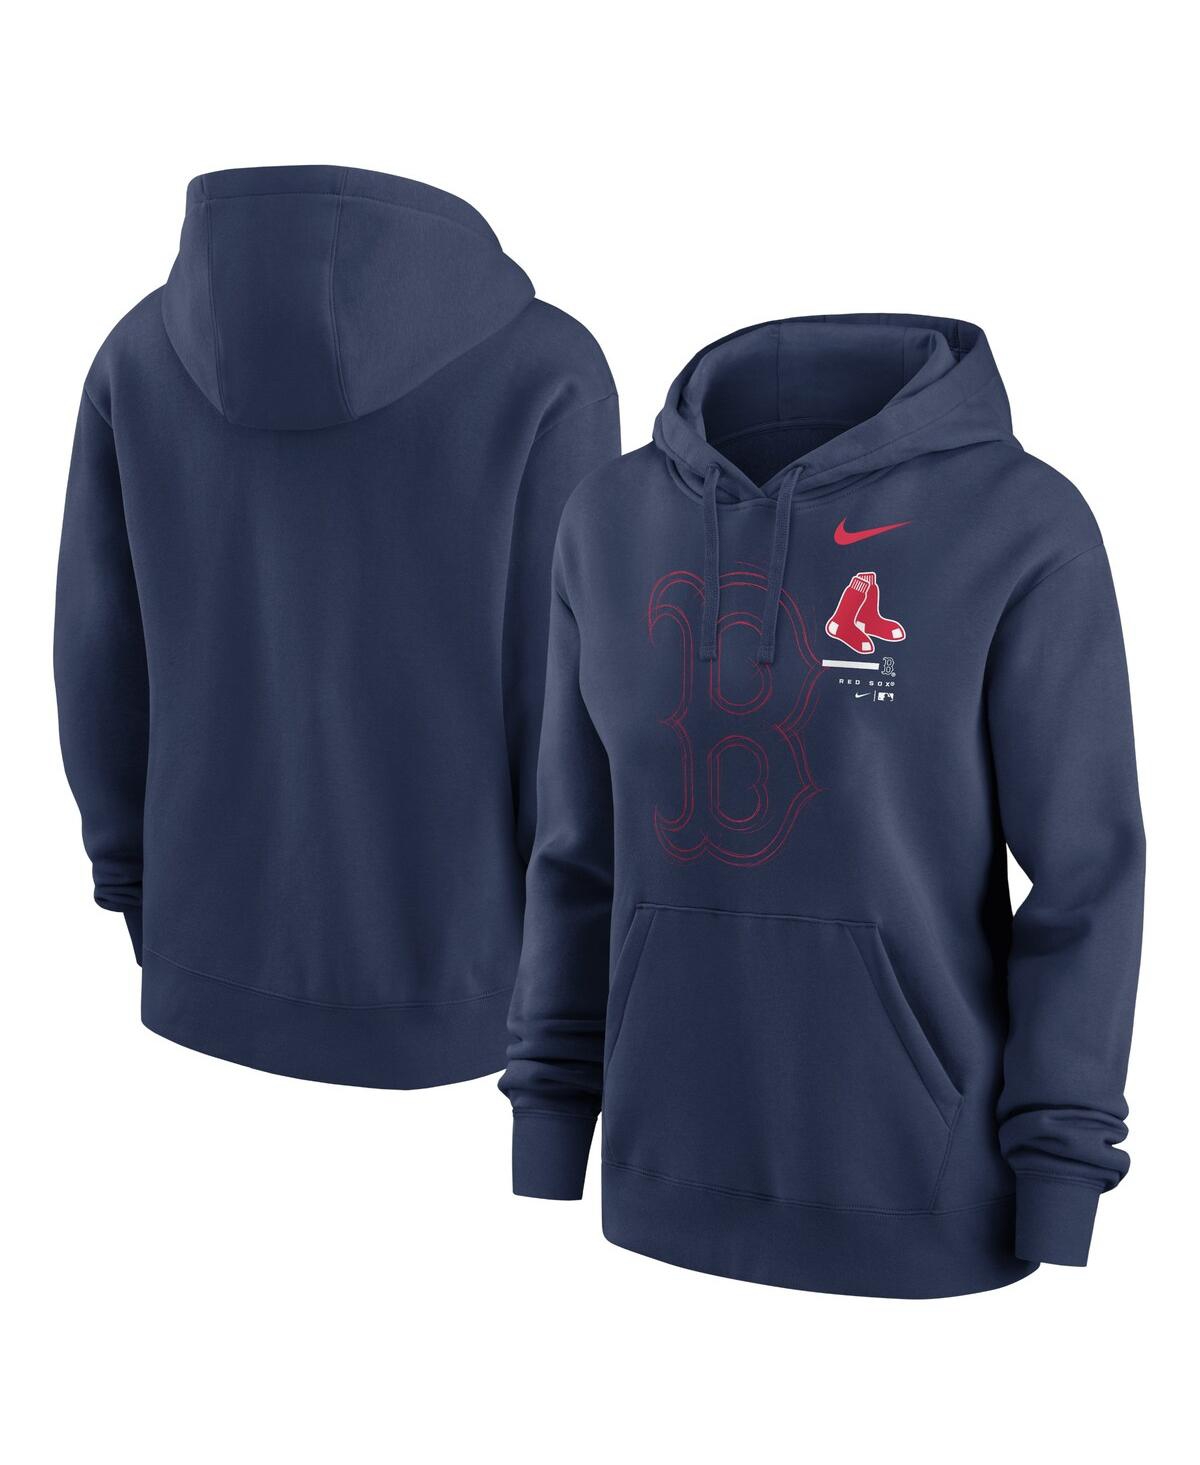 Shop Nike Women's  Navy Boston Red Sox Big Game Pullover Hoodie